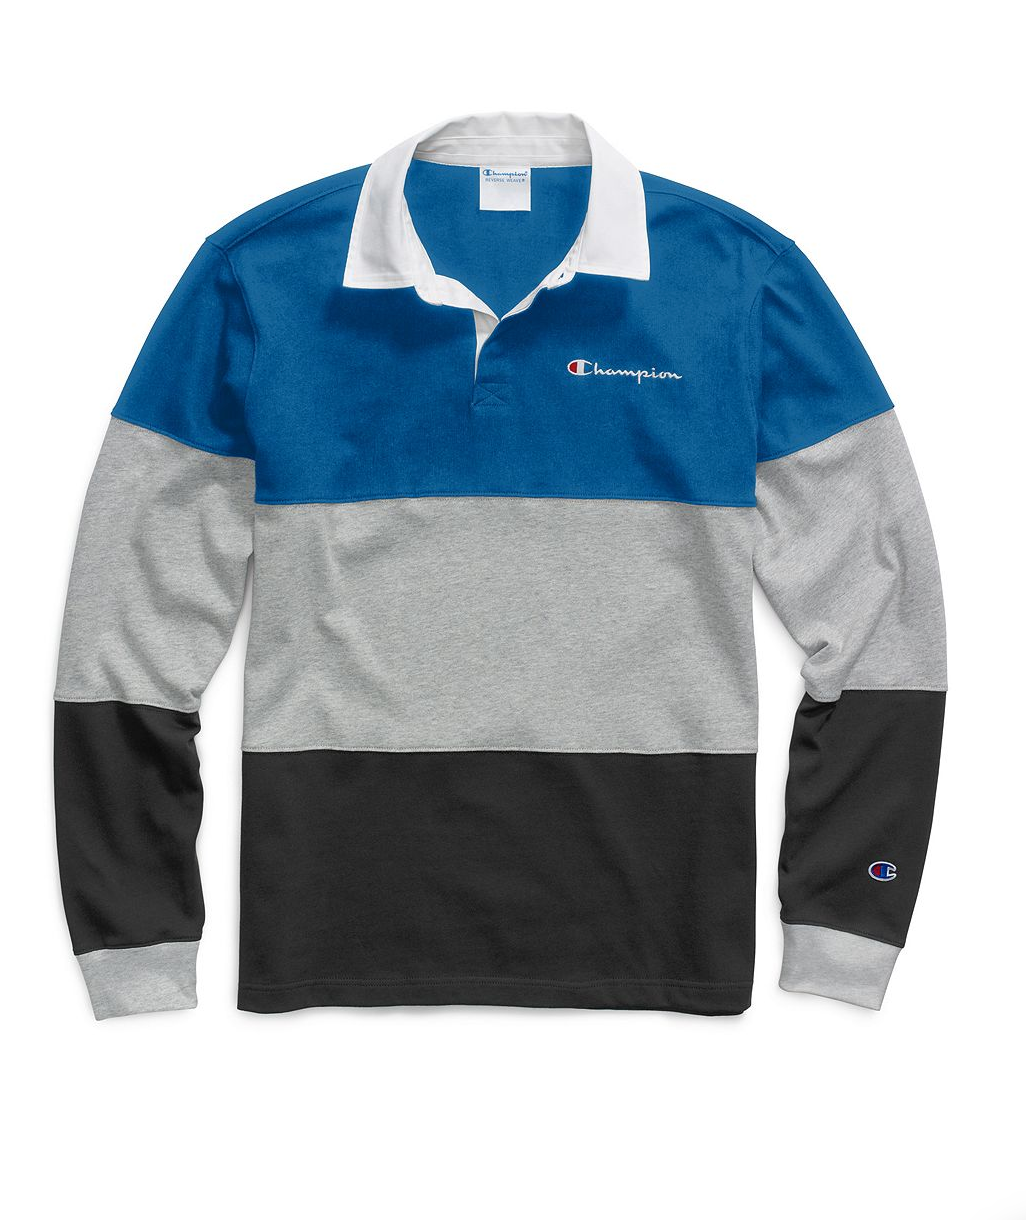 Men's Colorblock Rugby Shirt 